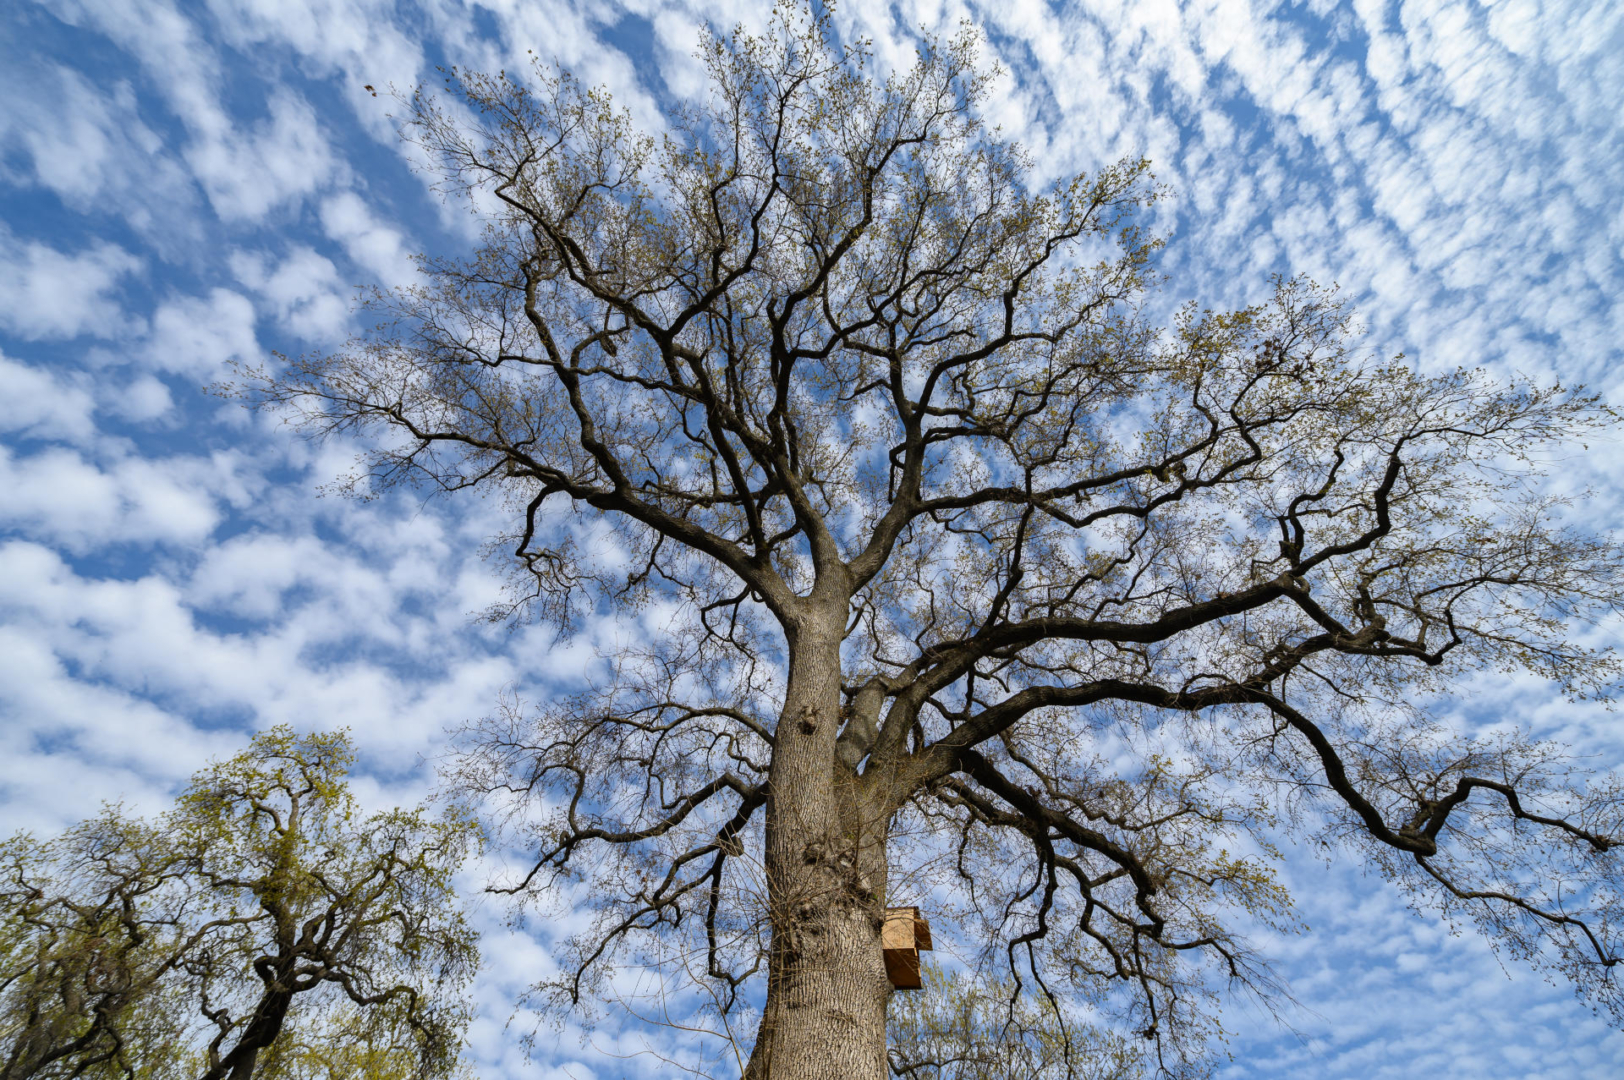 Tree branches bare of leaves in the foreground while cirrus clouds float in the background